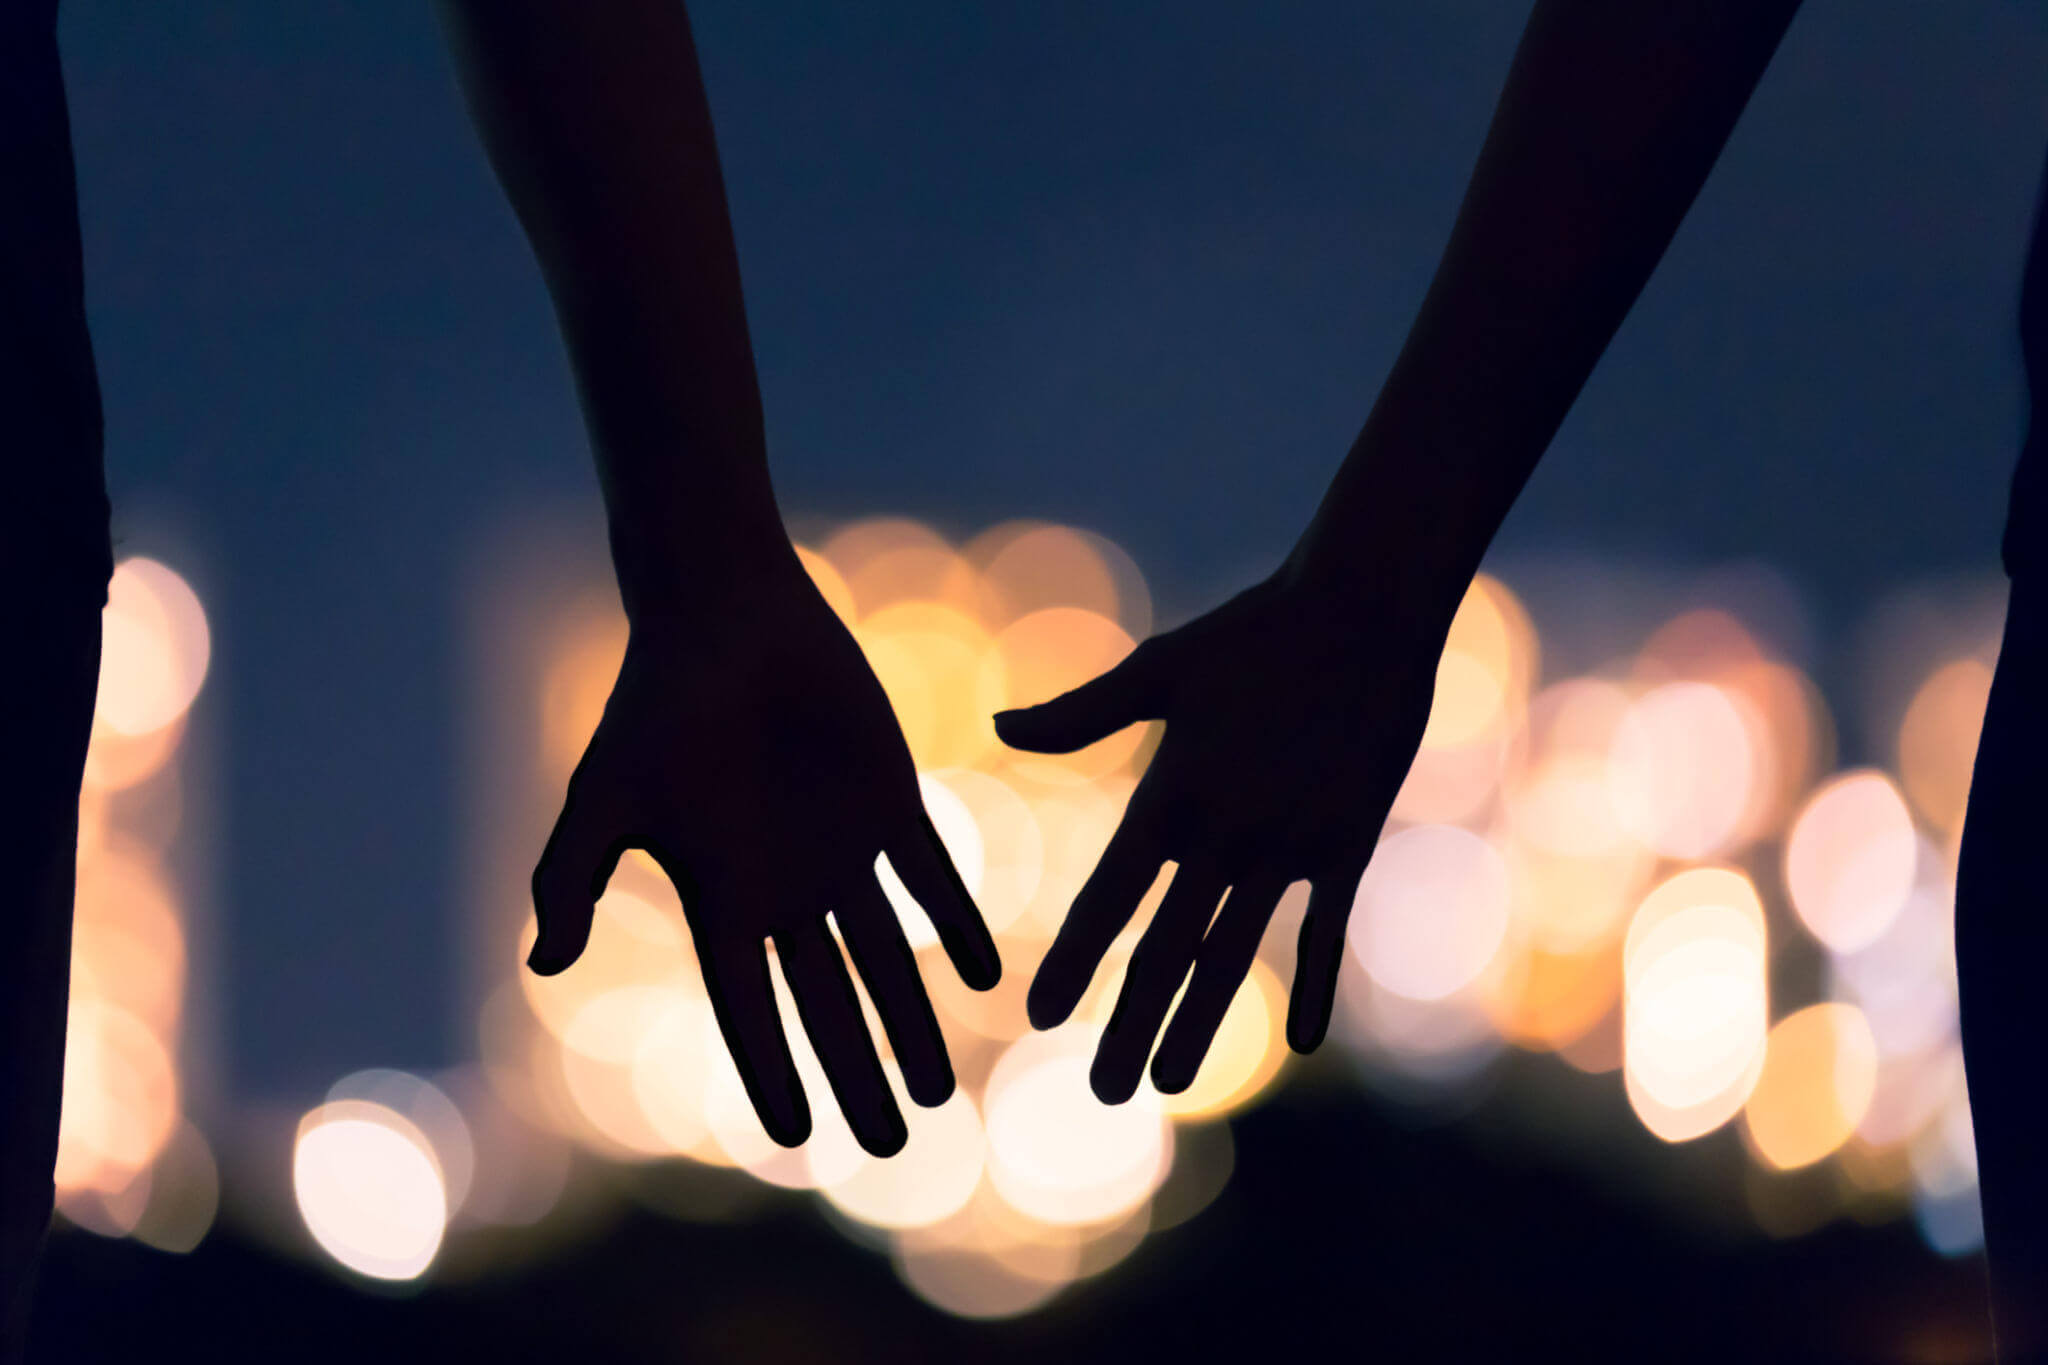 Photo of a couple reaching for each others hands at night. Are you struggling with deciding if you want to continue with your relationship? Learn how discernment counseling in Georgia can help provide you support.